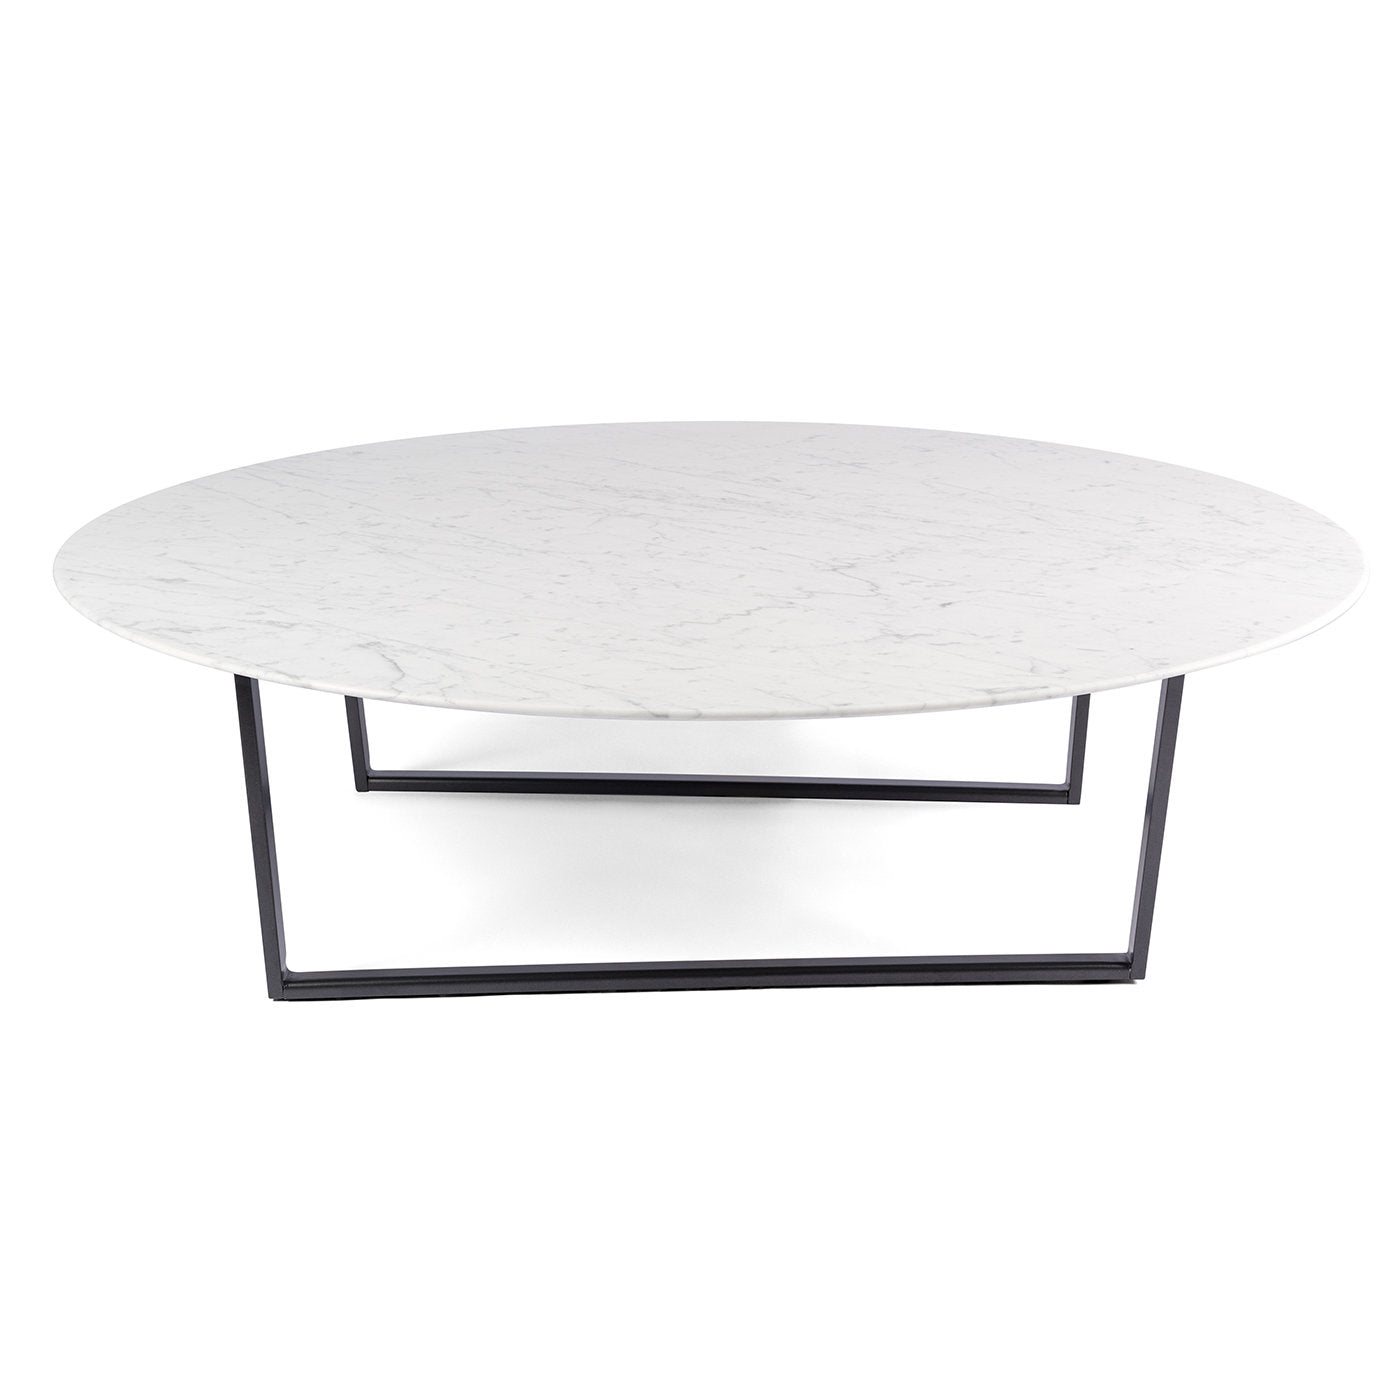 Tall Dritto Coffee Table by Pietro Lissoni - Alternative view 2